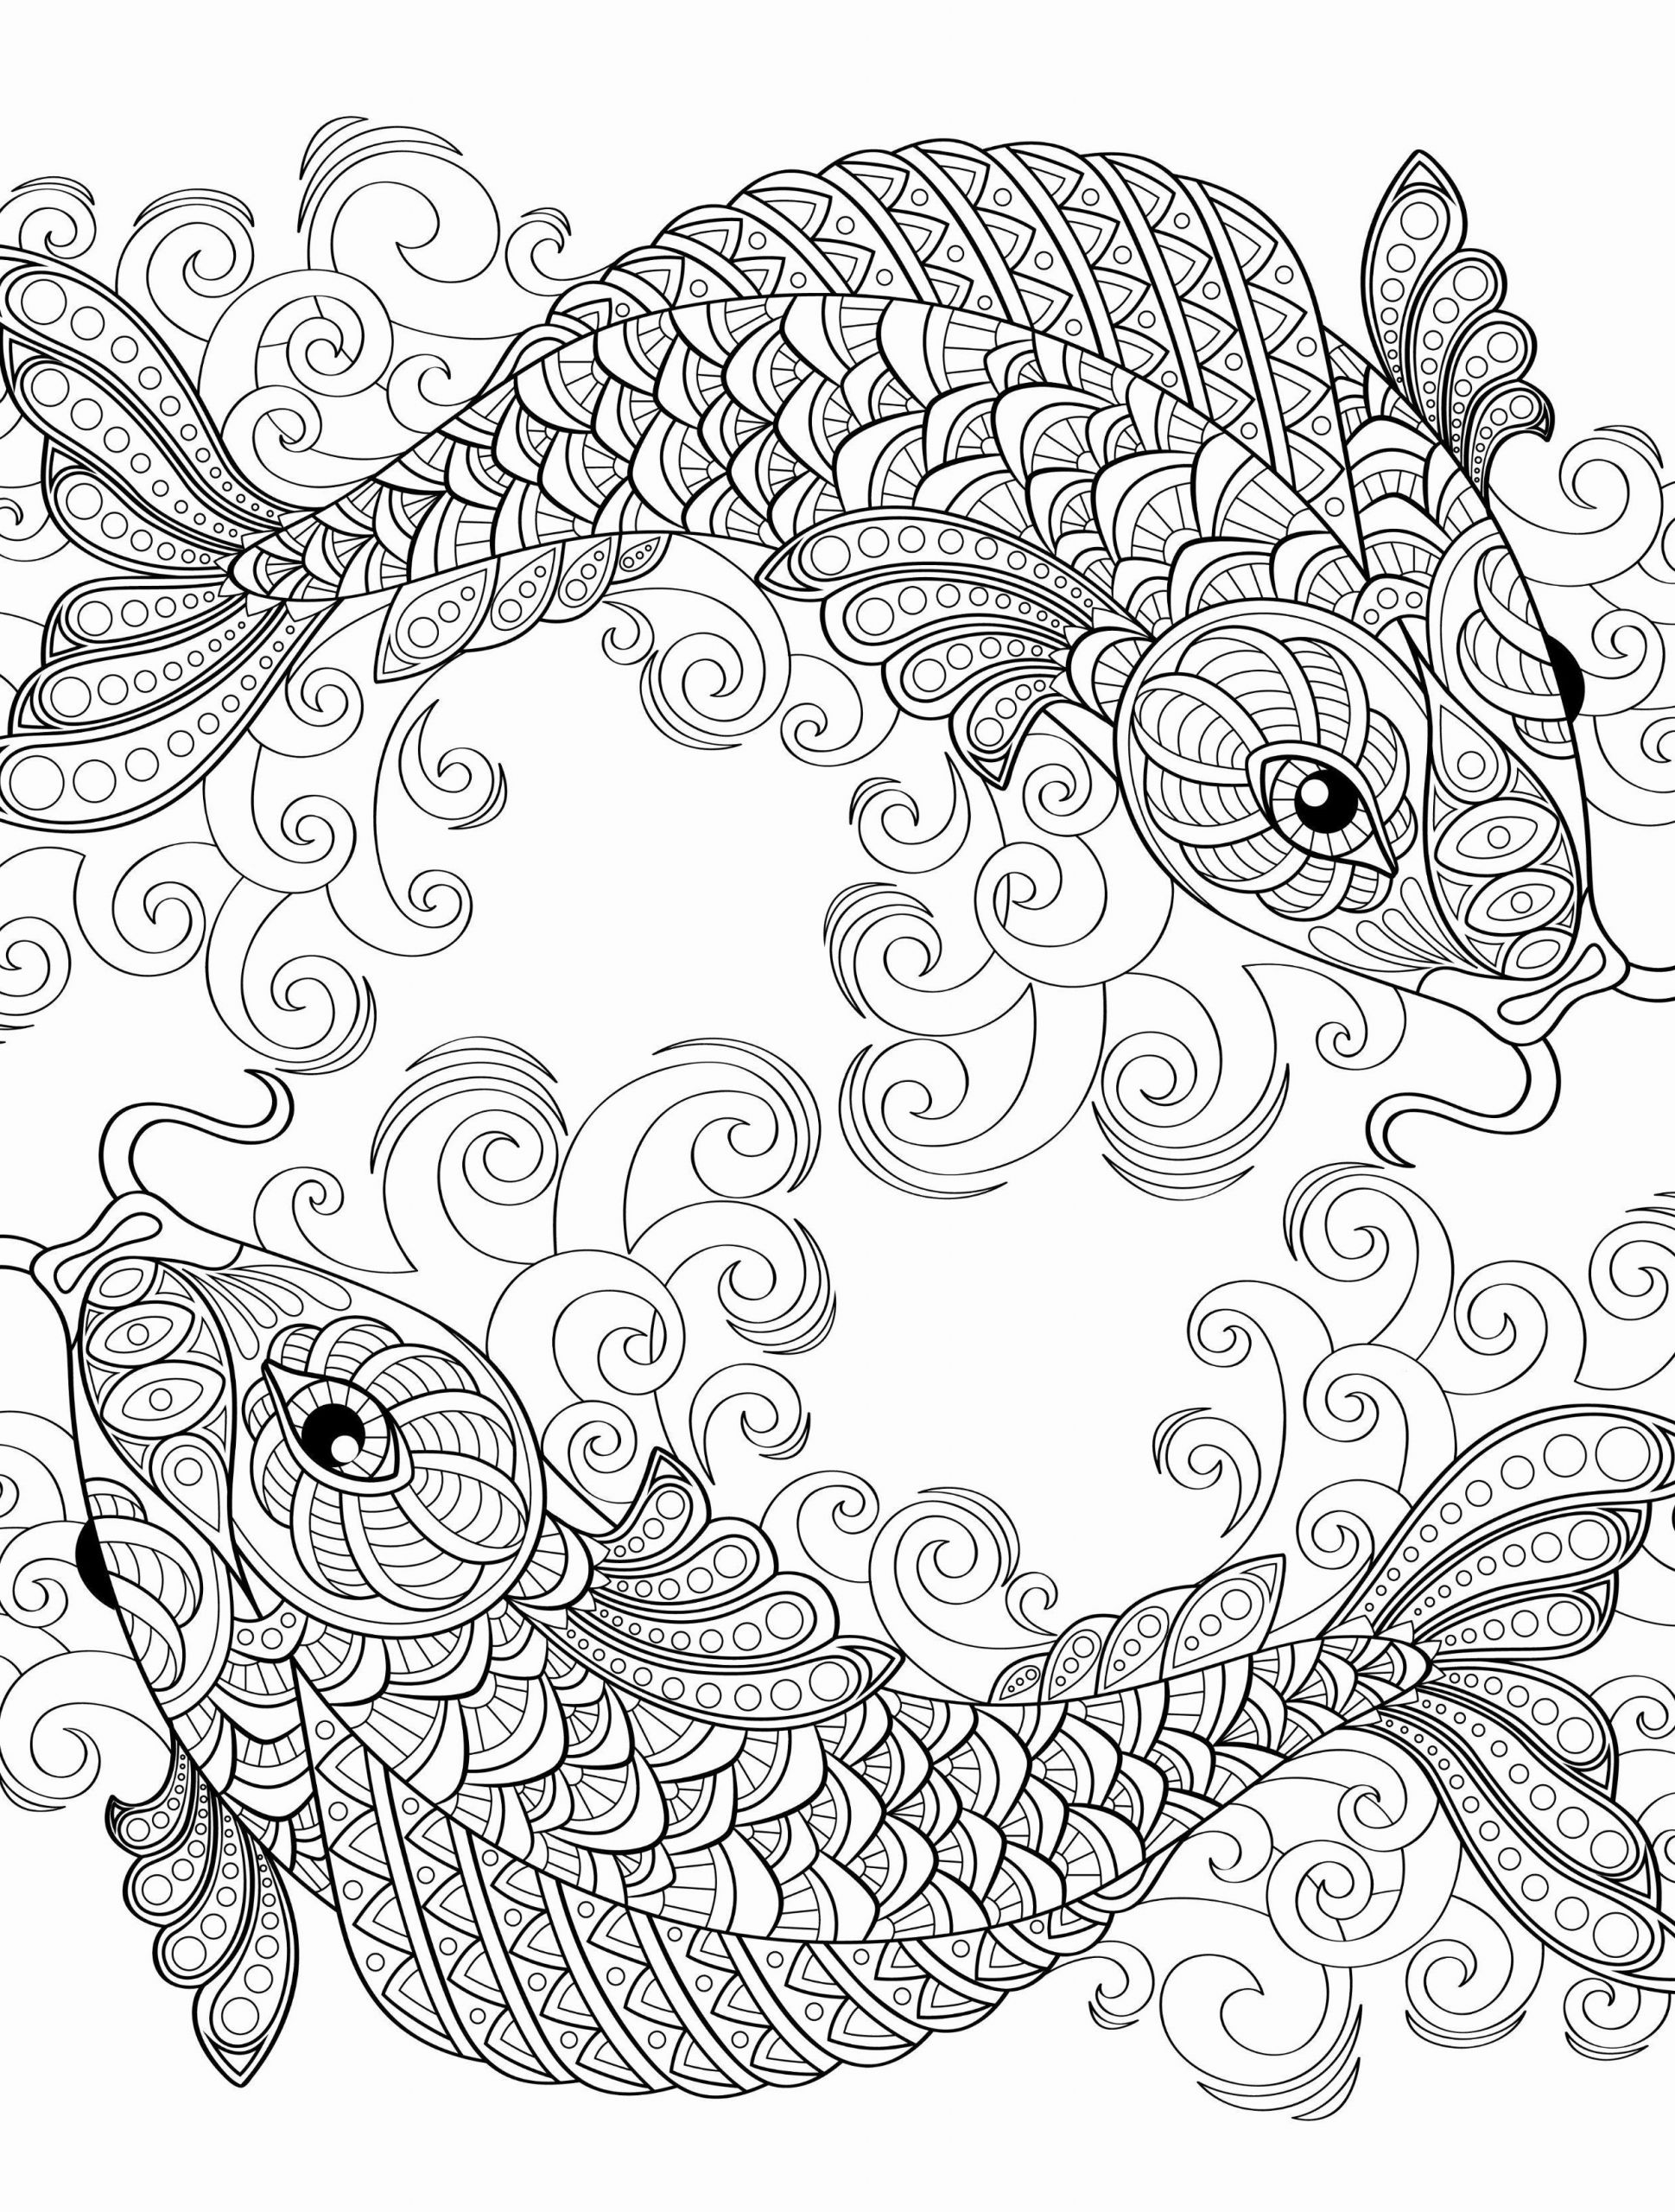 cadence coloring page awesome image coloring book page 54 jvzooreview of cadence coloring page